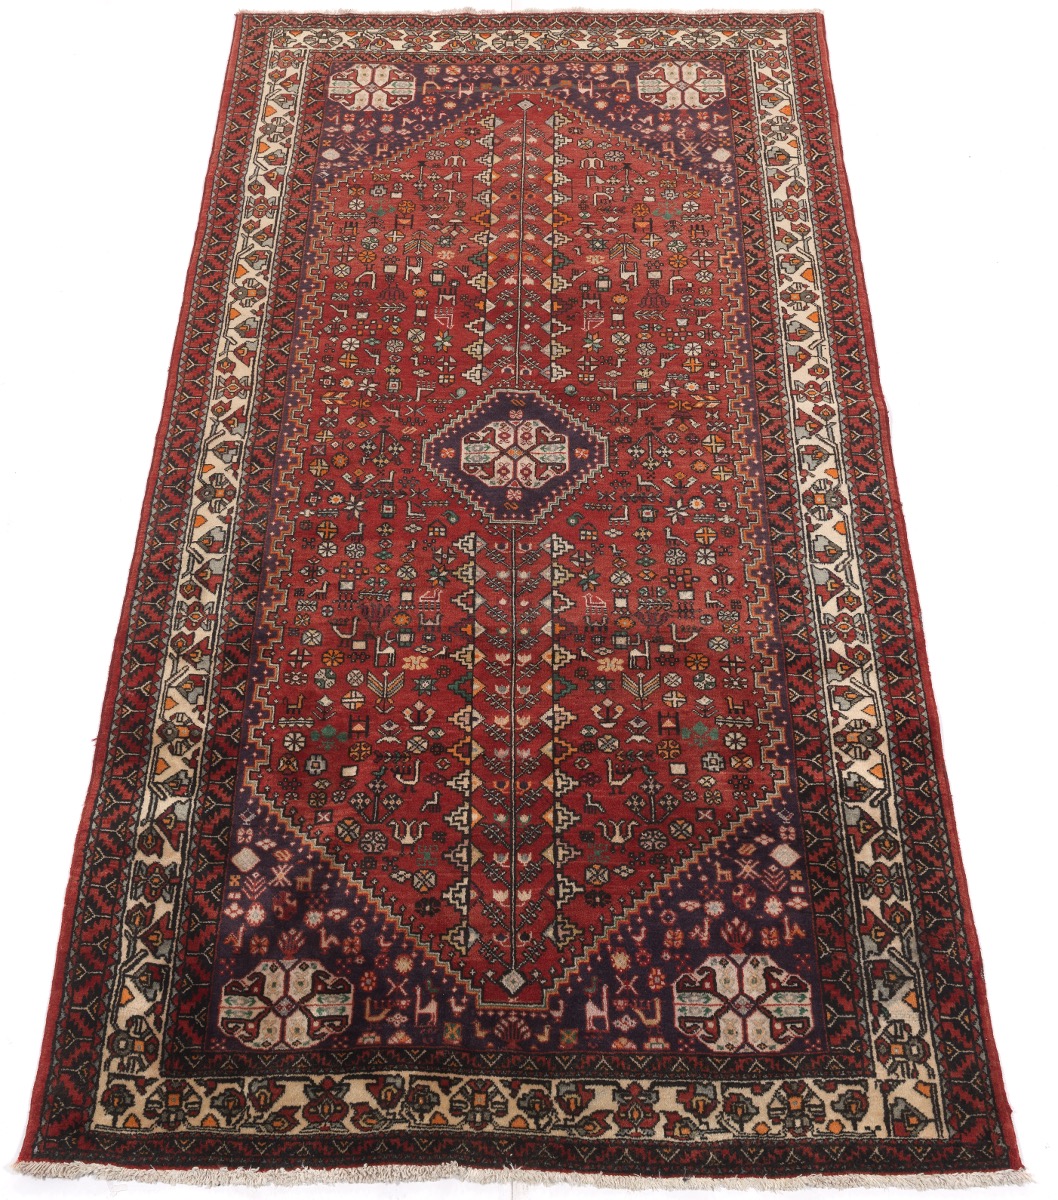 Semi-Antique Fine Hand-Knotted Abadeh Pictorial Carpet